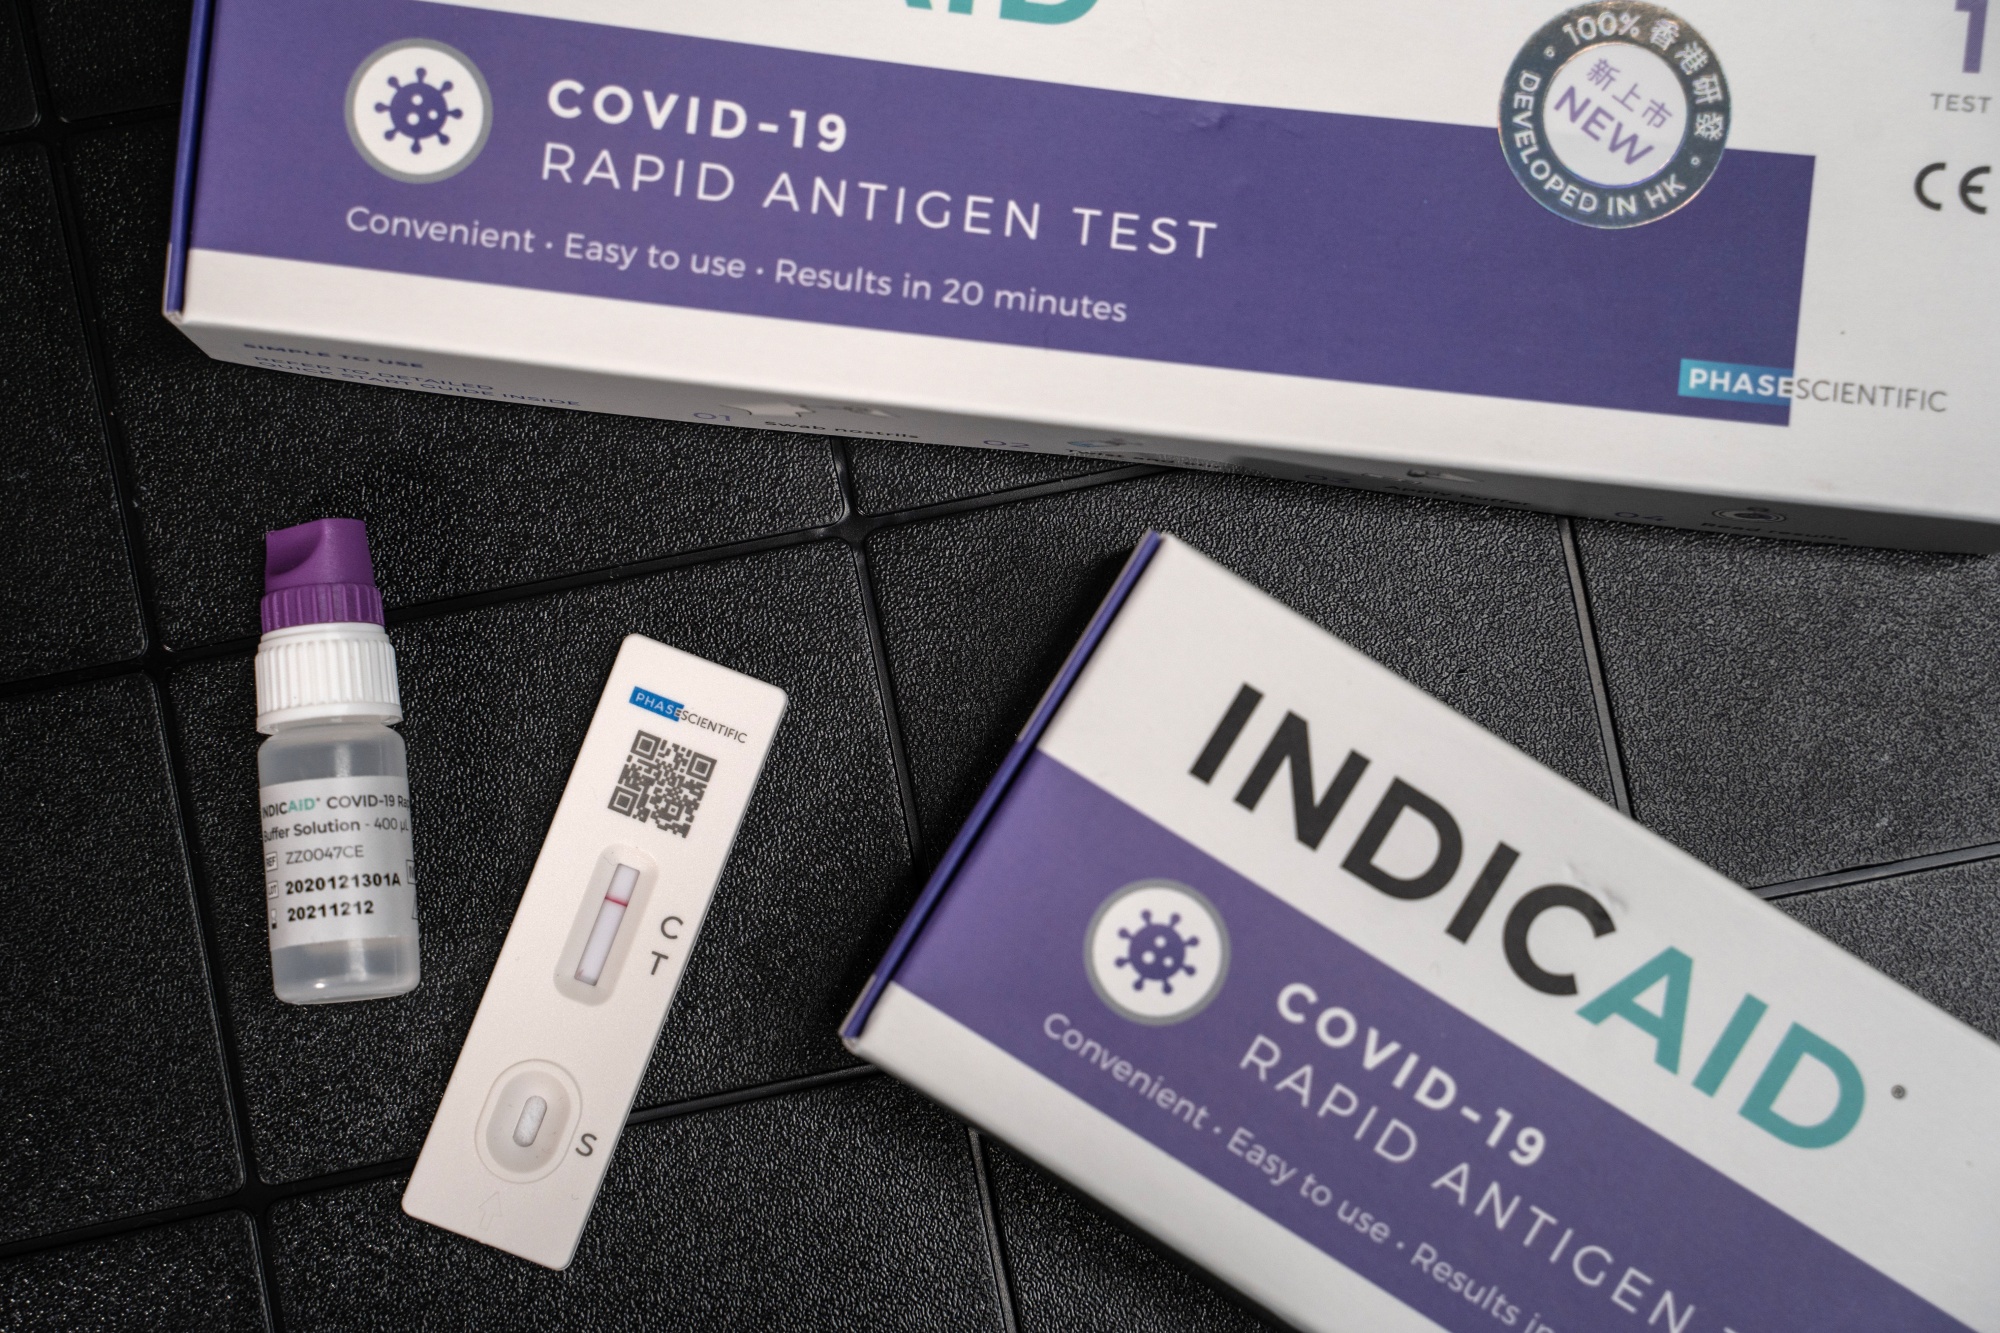 Coping with COVID-19: Australian Scientists Successfully Test